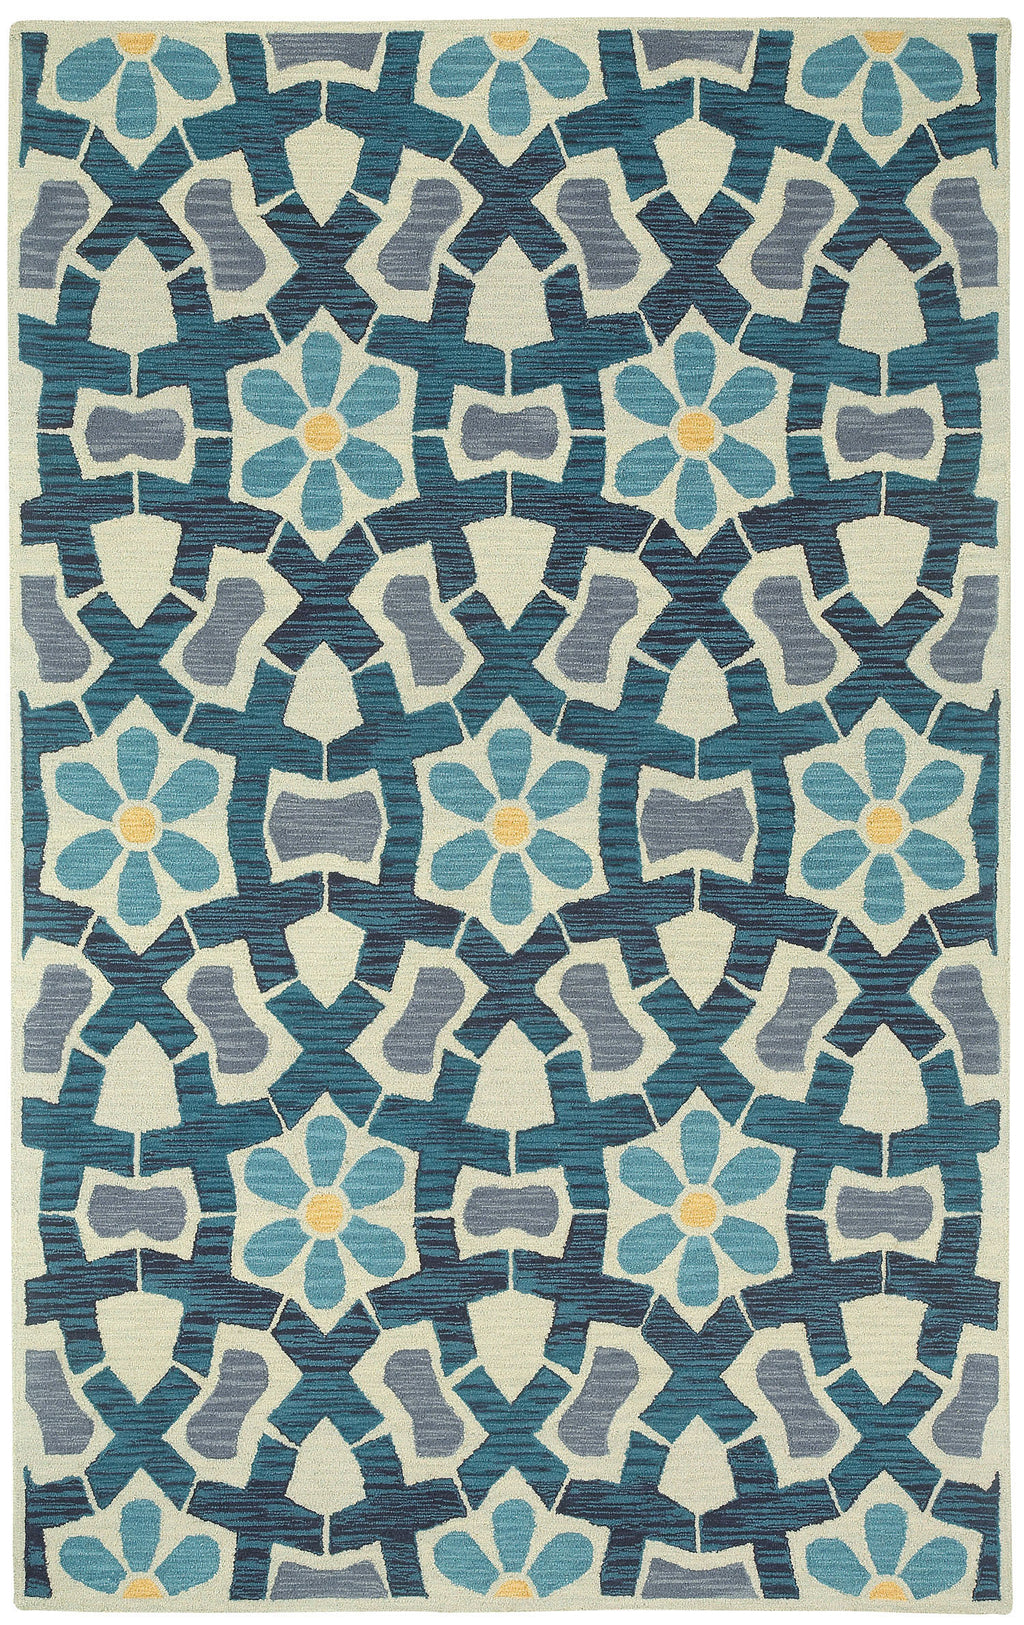 Capel Stepping Stone 3293 Sand Blue 740 Area Rug main image